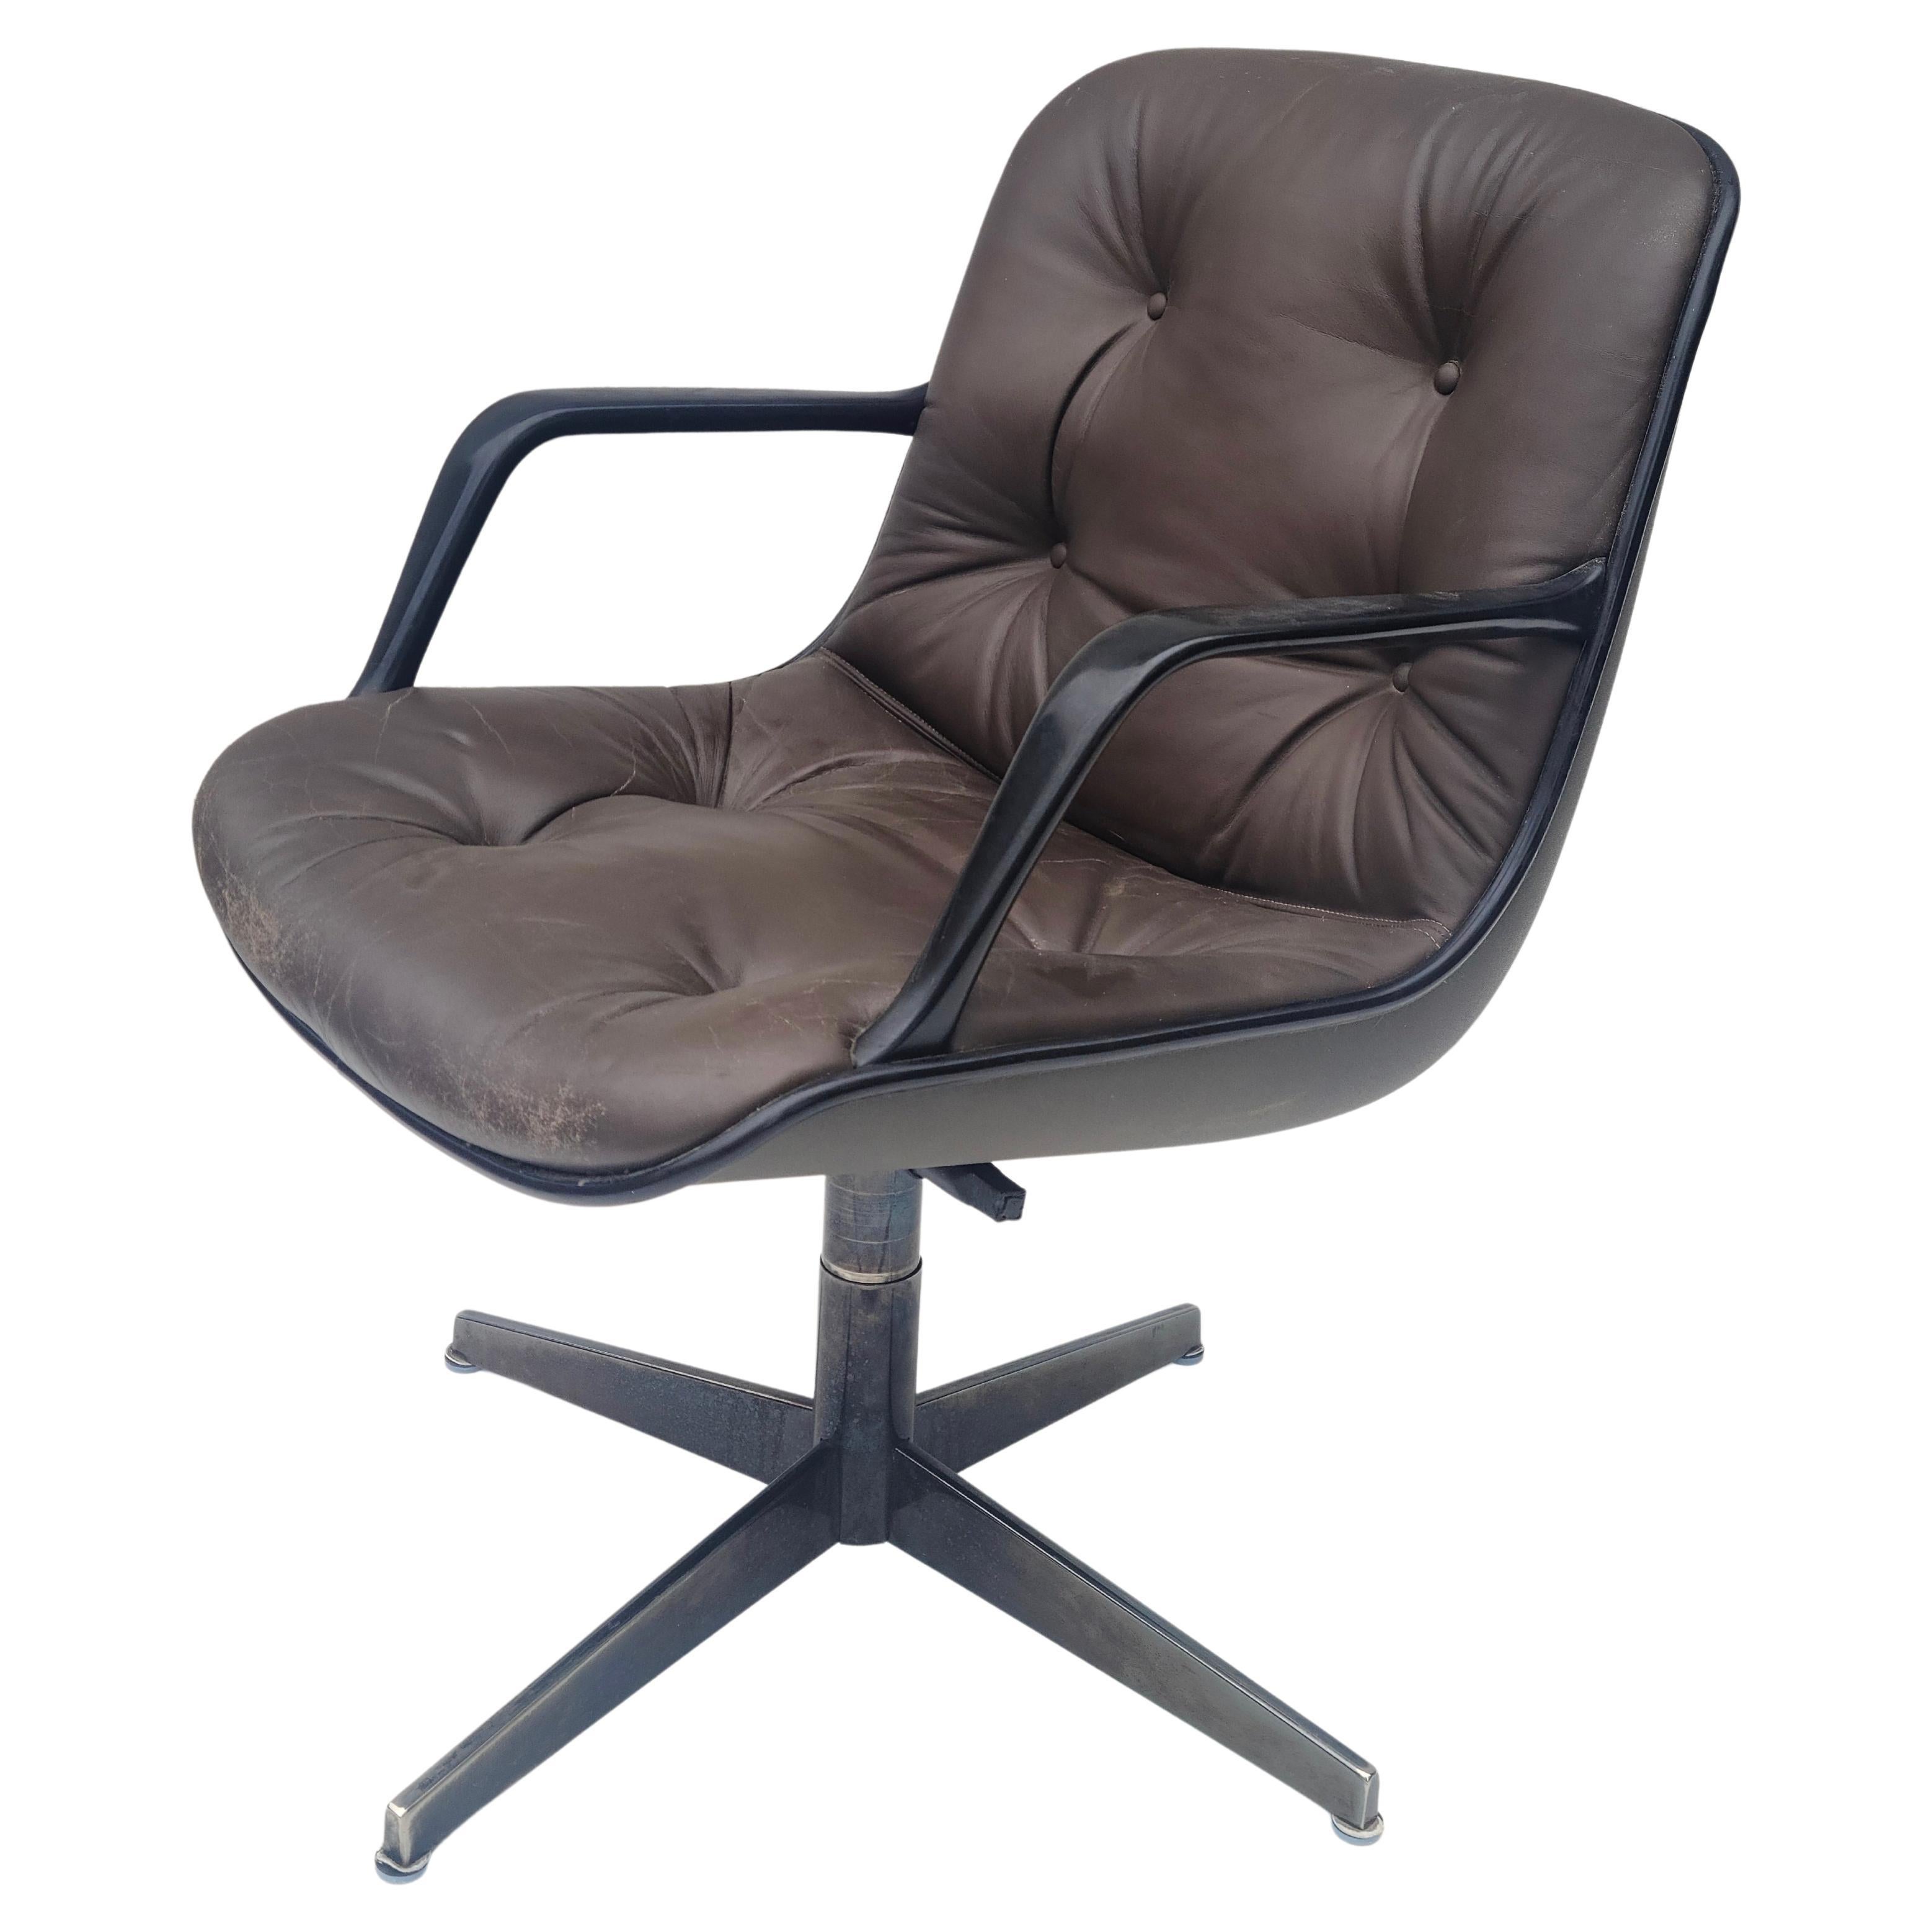 Late 20th Century Leather Swivel Lounge Chair by Steelcase after Pollock Knoll